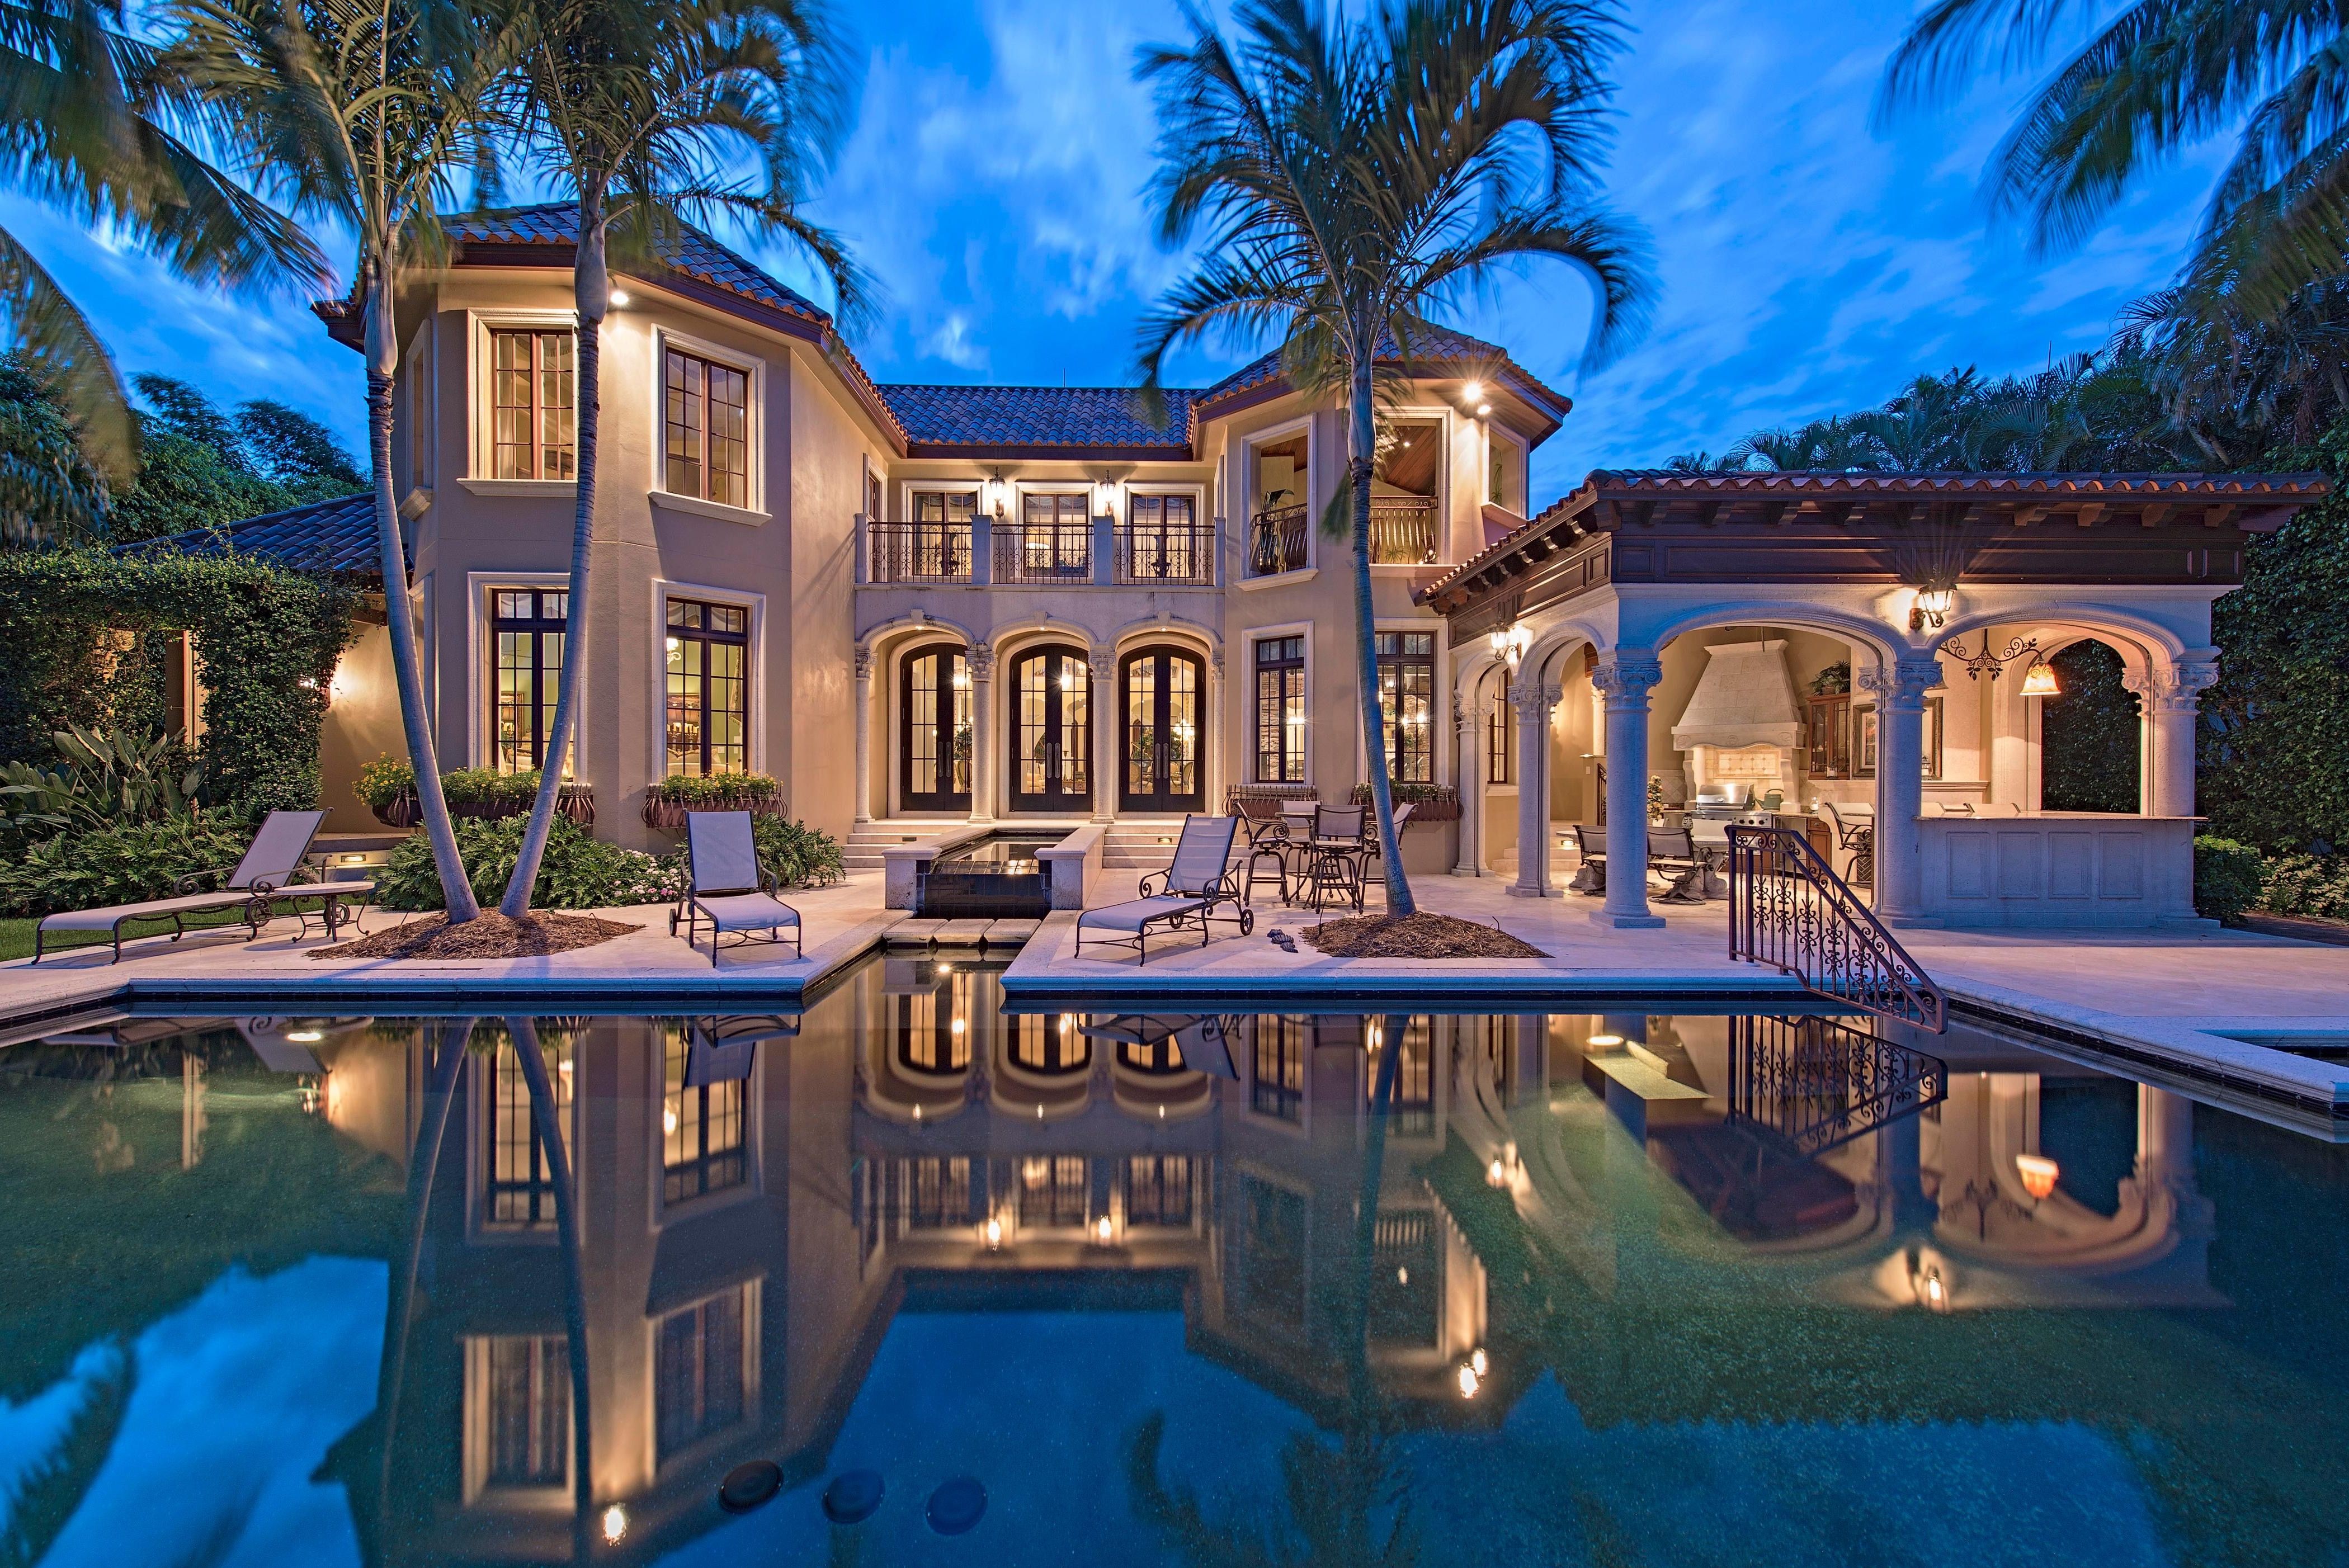 Luxurious Spanish Mediterranean House Exterior With Patio And Swimming Pool (Image 12 of 30)